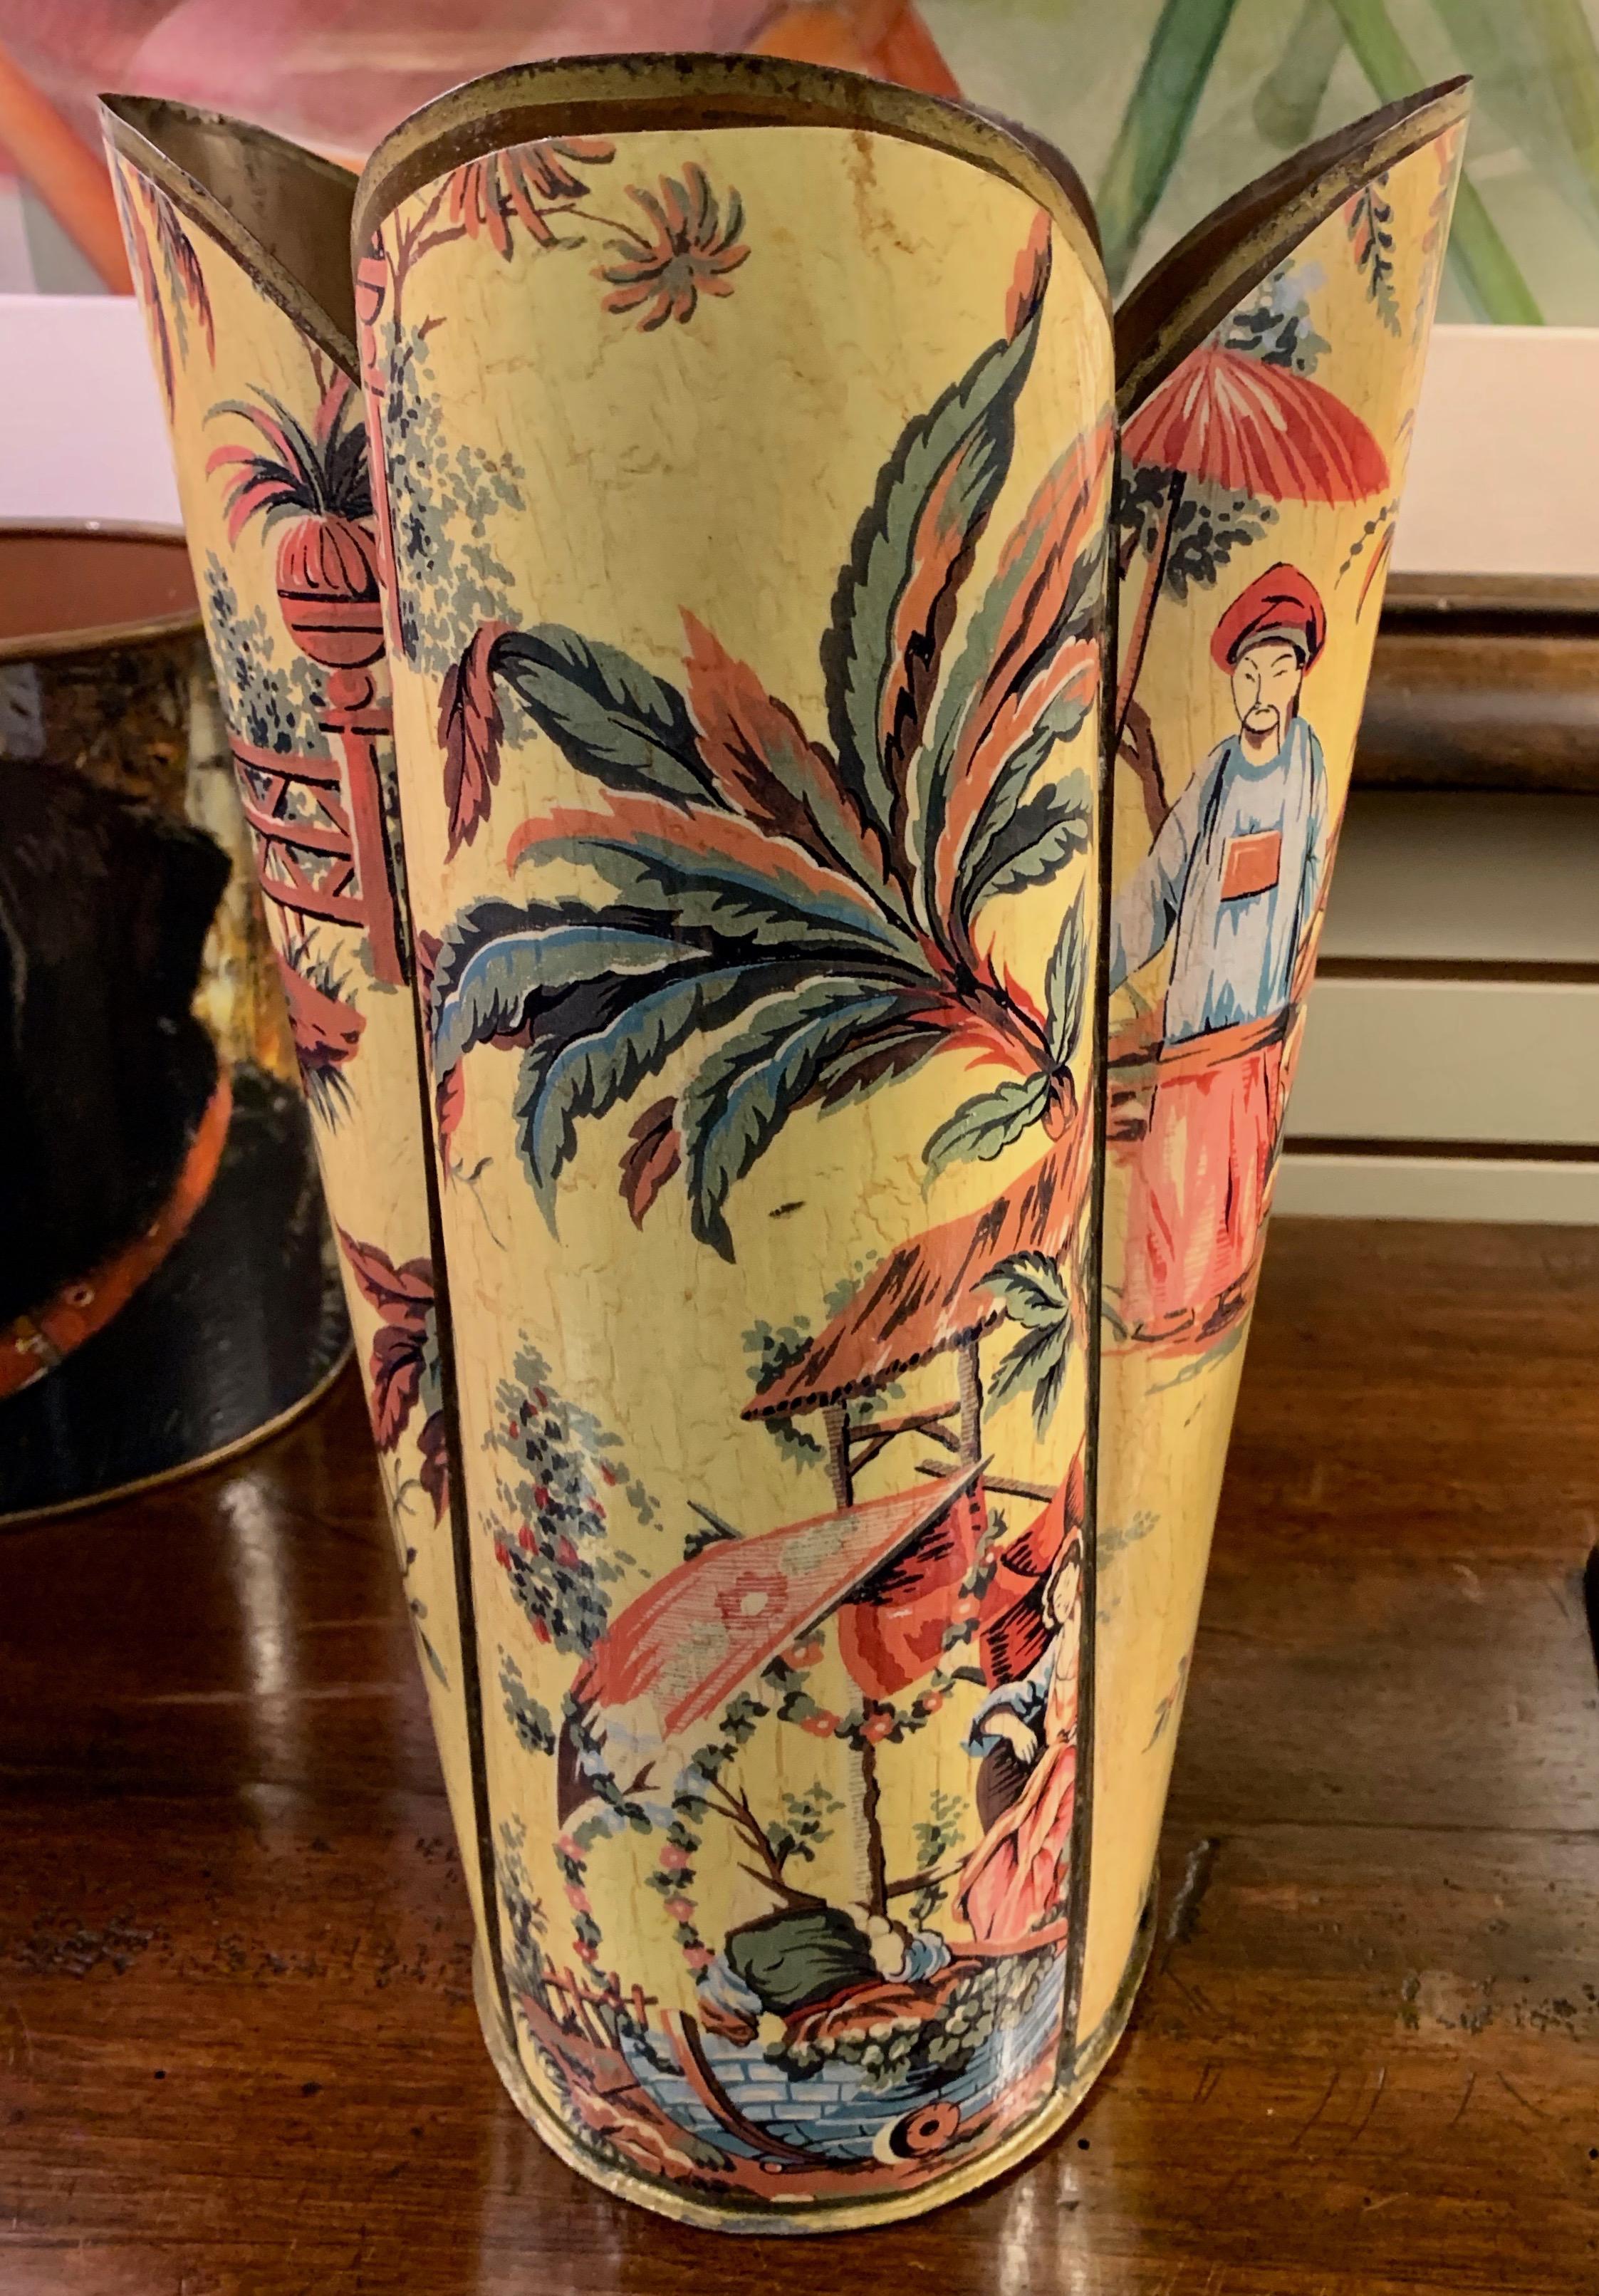 Scalloped tin decoupage applied paper in Chinoiserie style - Beautifully applied and in wonderful condition. The vibrant and classic motif works well in many rooms. A scene that works well in the traditional home to the modern space.